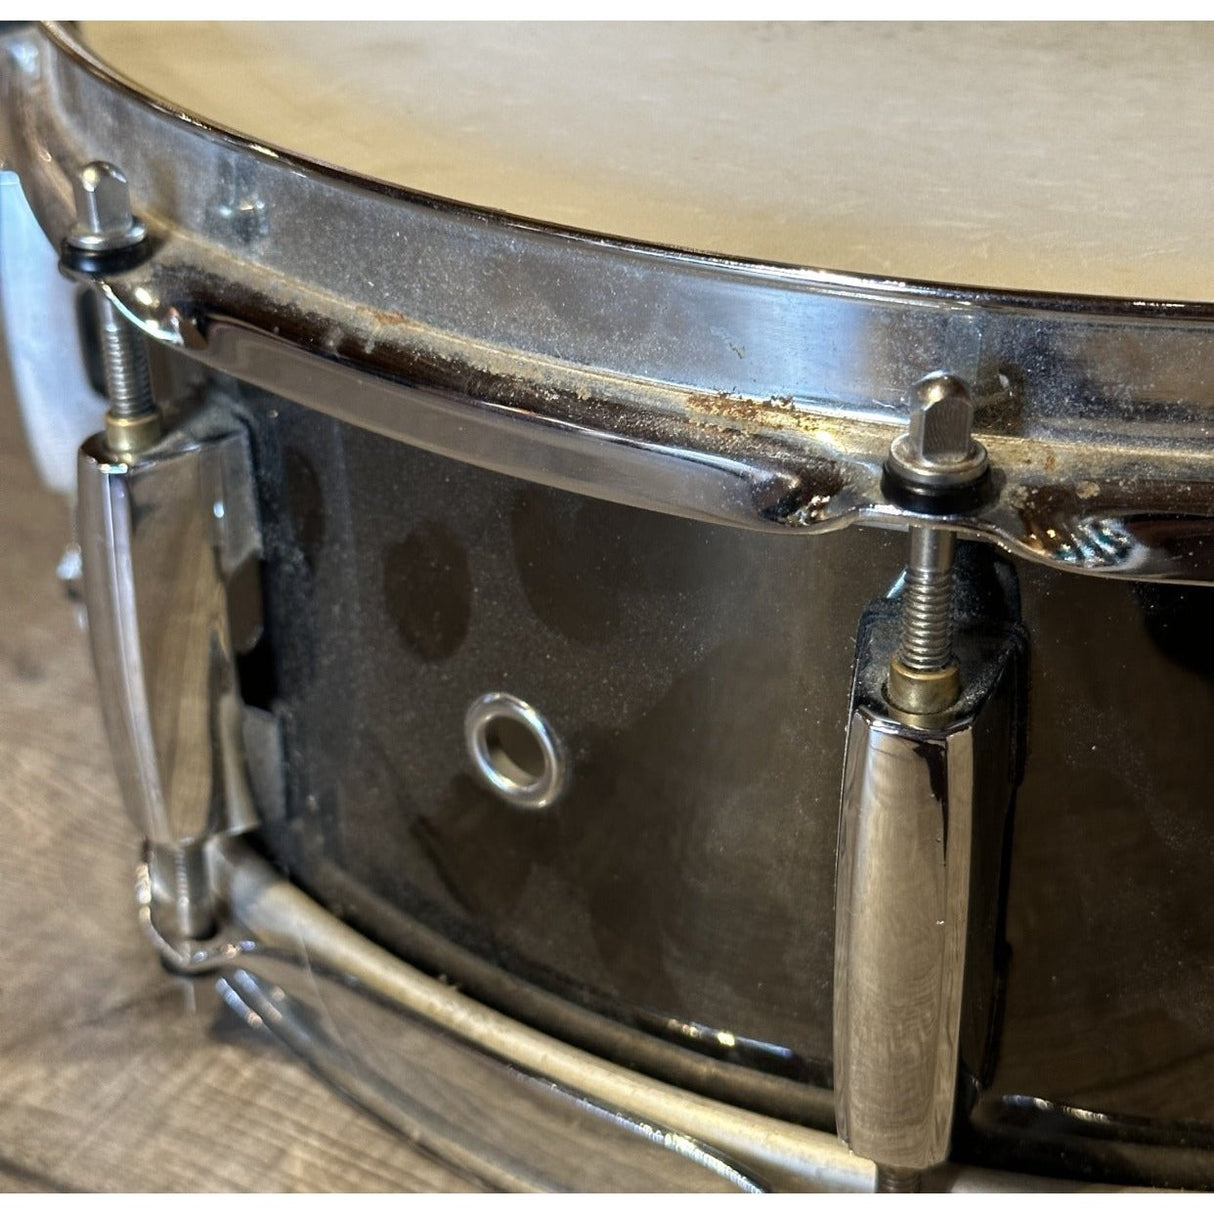 Used Pearl Signature Chad Smith Snare Drum 14x5.5